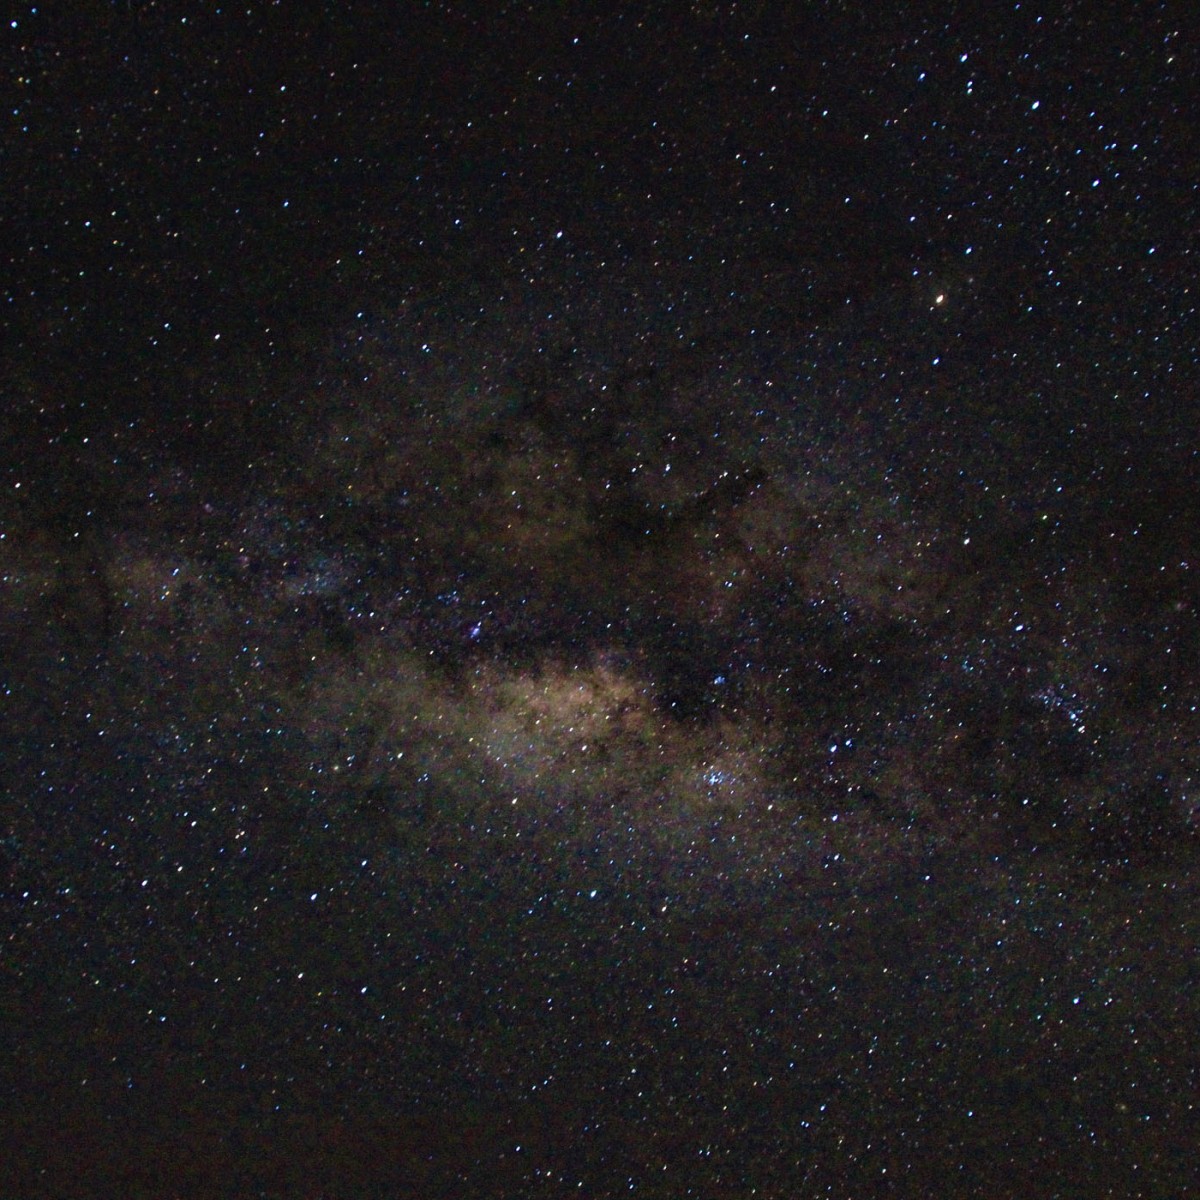 Belt of the Milky Way from Captain Cook, The Big Island, Hawaii